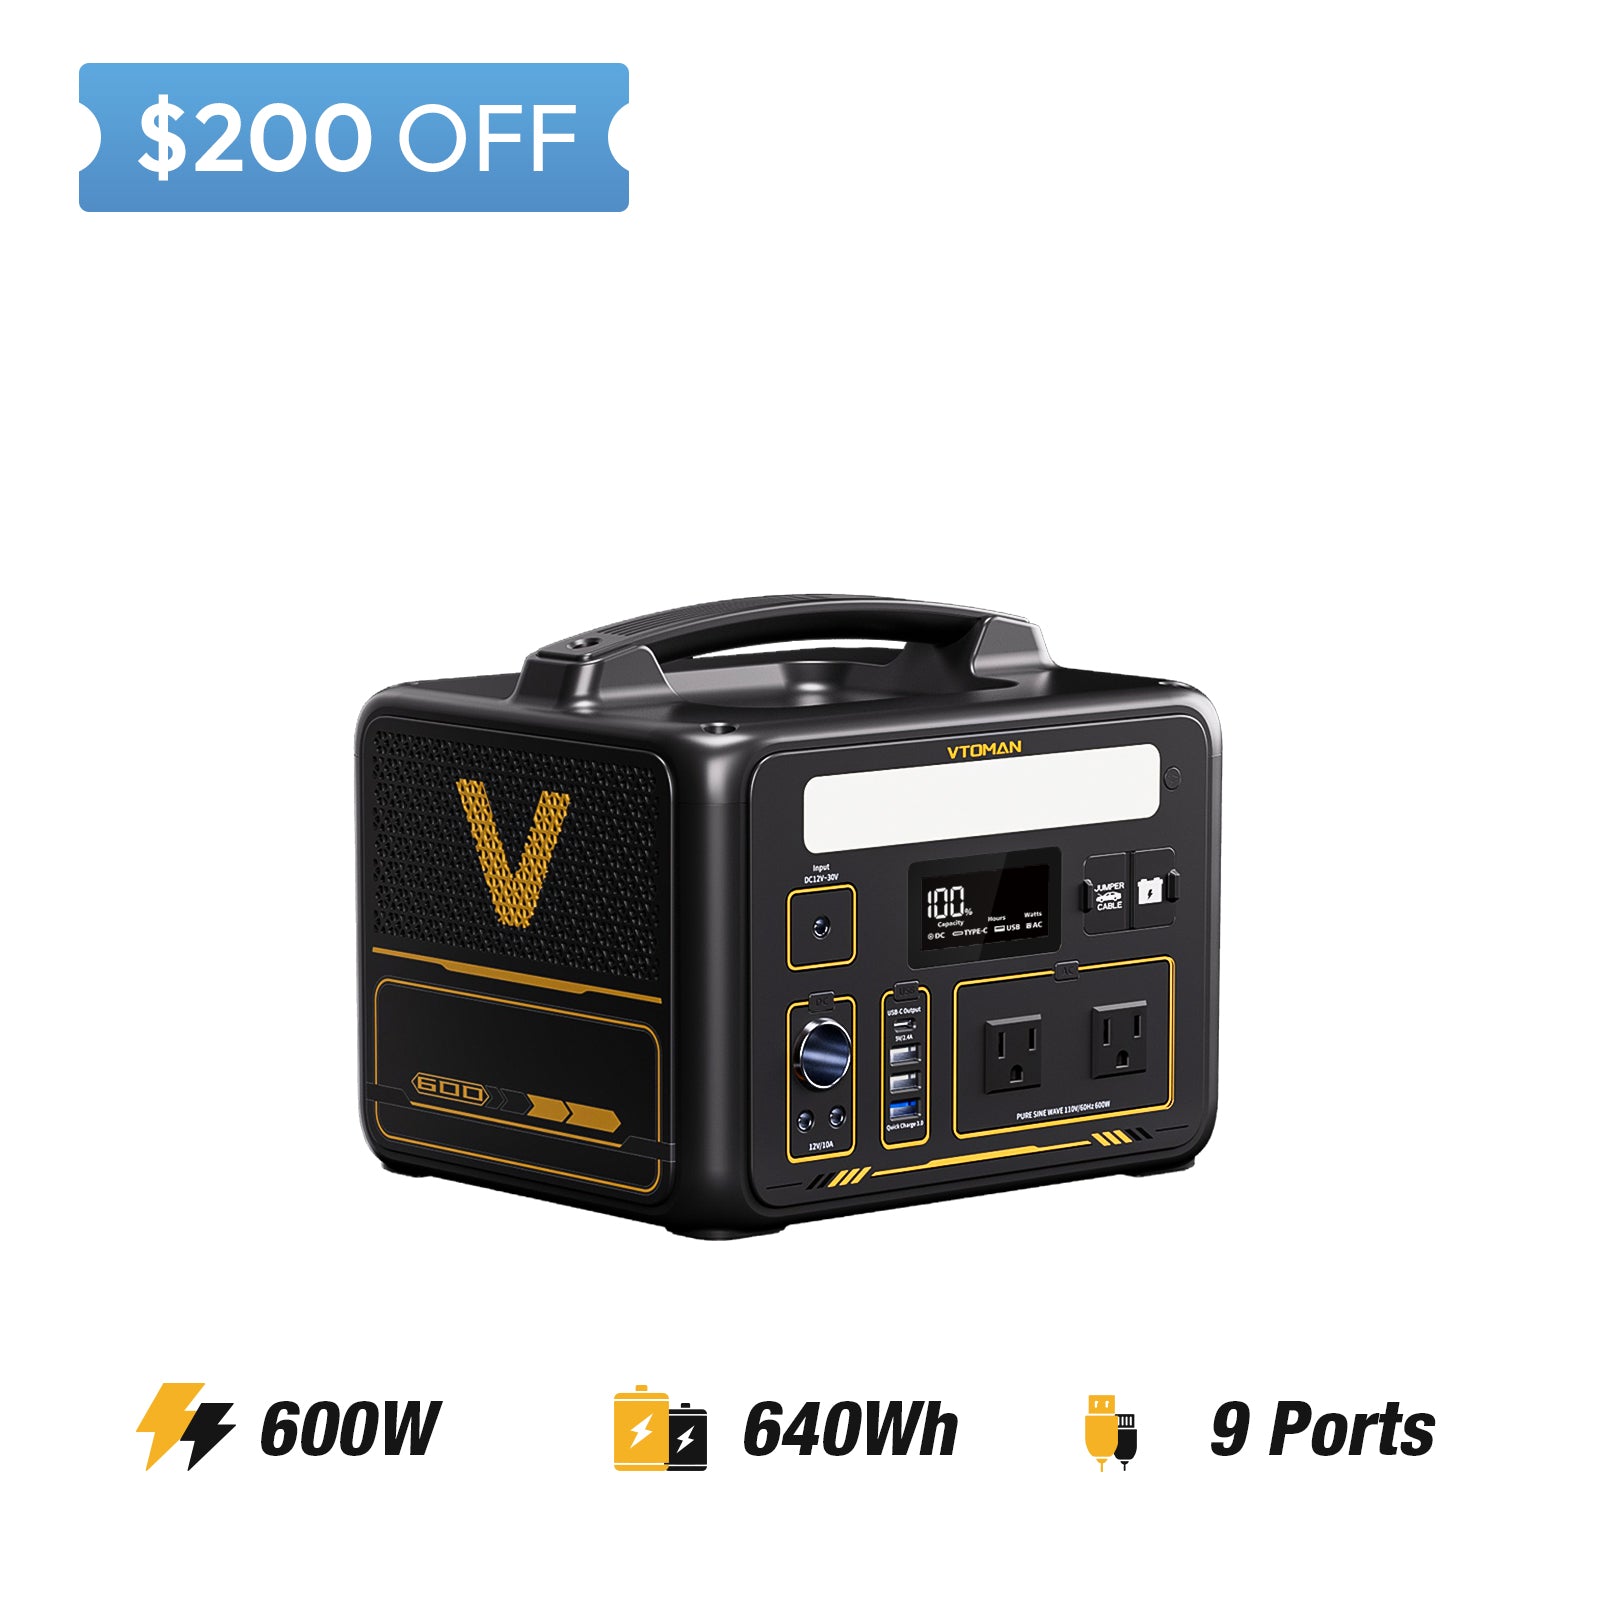 jump 600x save $200 in summer sale